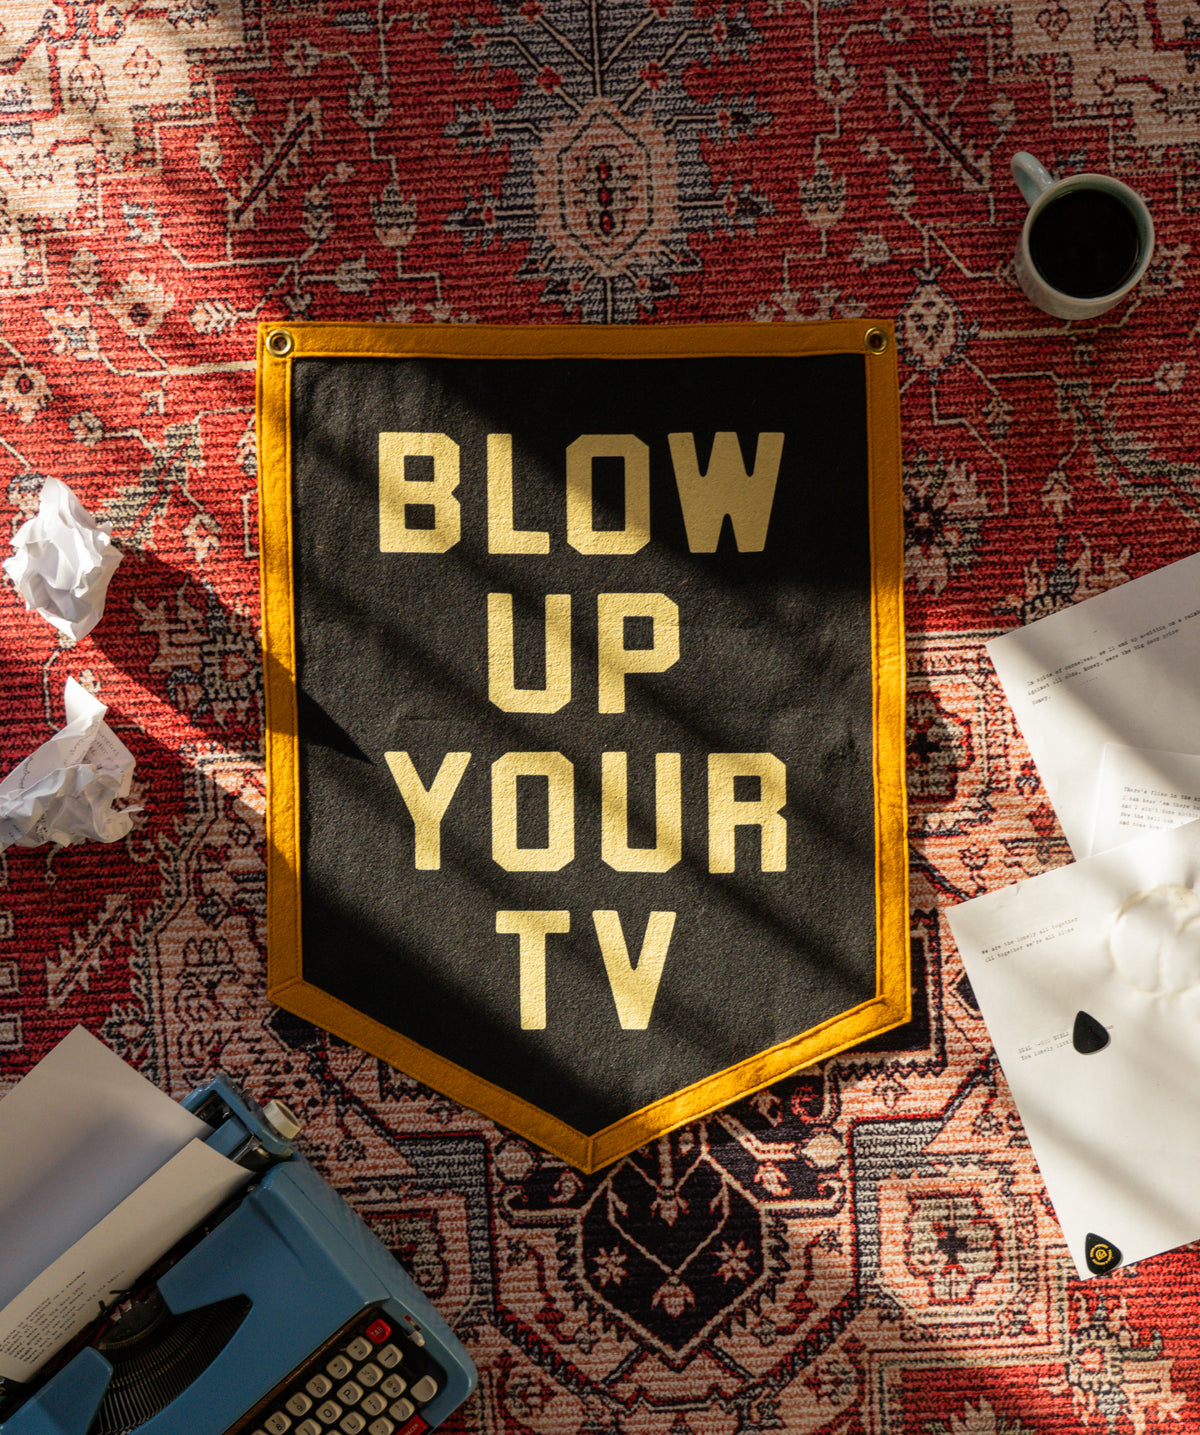 https://www.oxfordpennant.shop/wp-content/uploads/1699/50/all-our-valued-clients-will-receive-a-fair-price-and-excellent-customer-service-from-blow-up-your-tv-camp-flag-john-prine-x-oxford-pennant-oxford-pennant-factory-shop_1.jpg